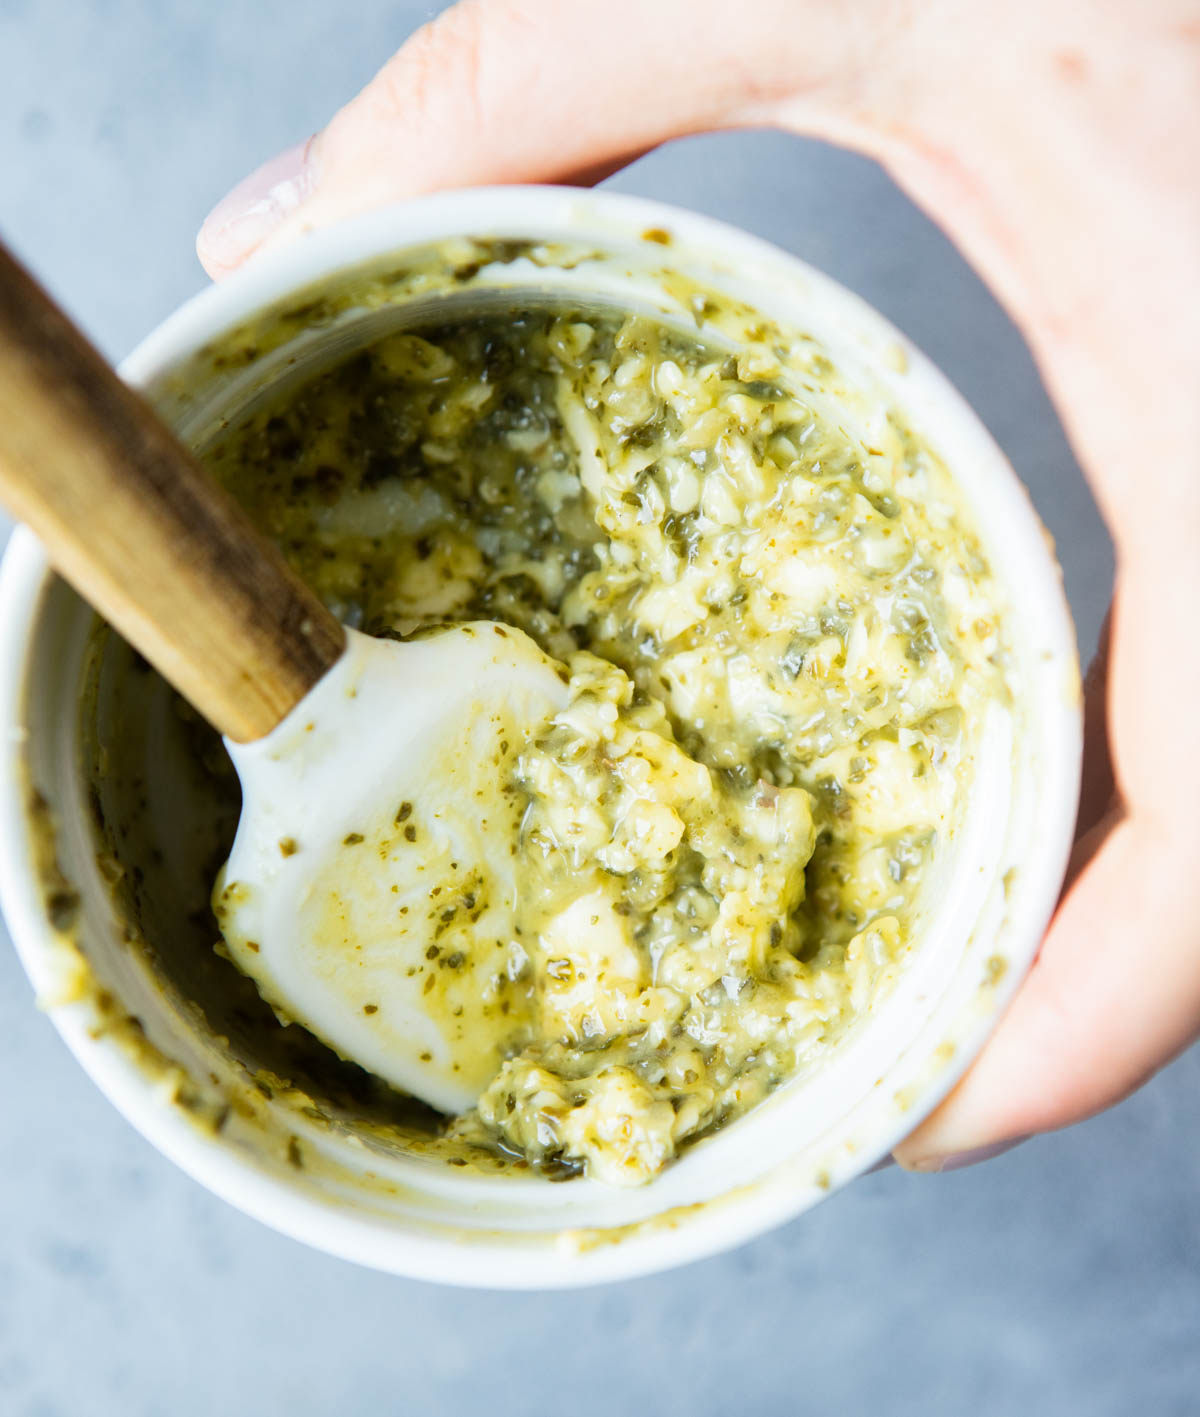 Small mixing bowl with a spatula combining butter and pesto.